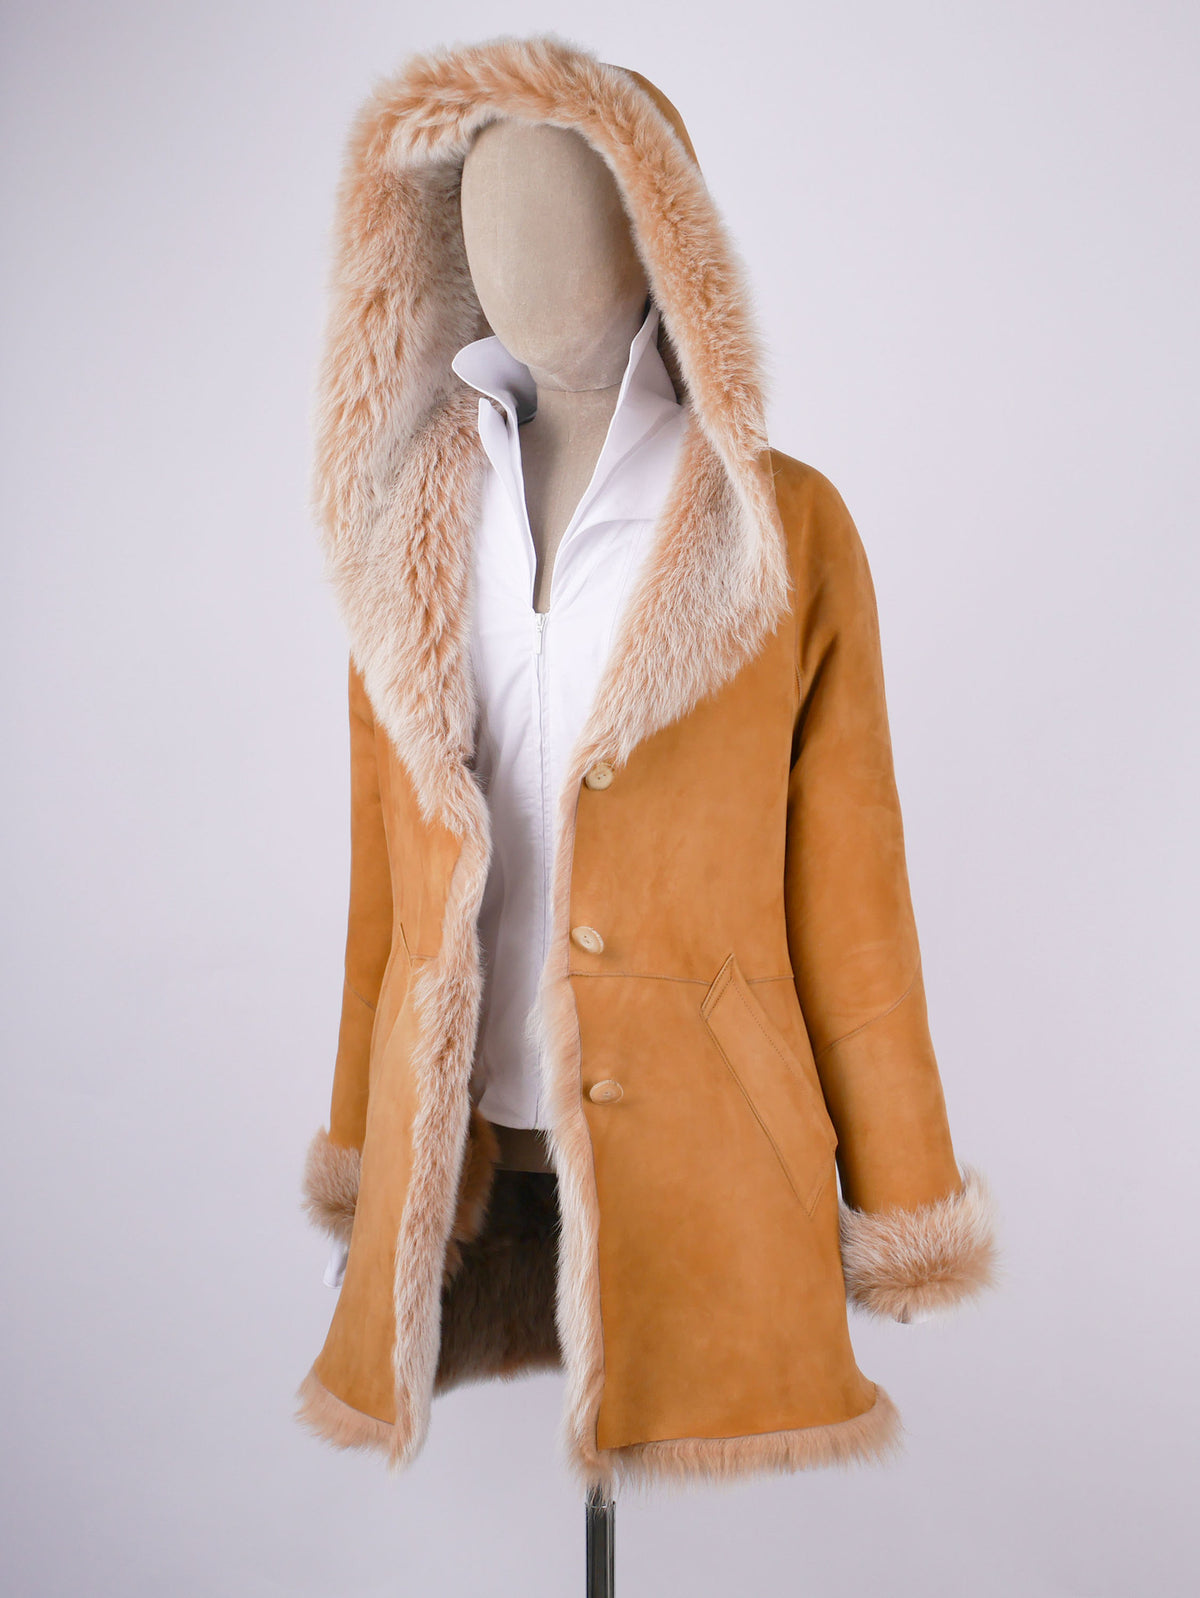 The Shearling